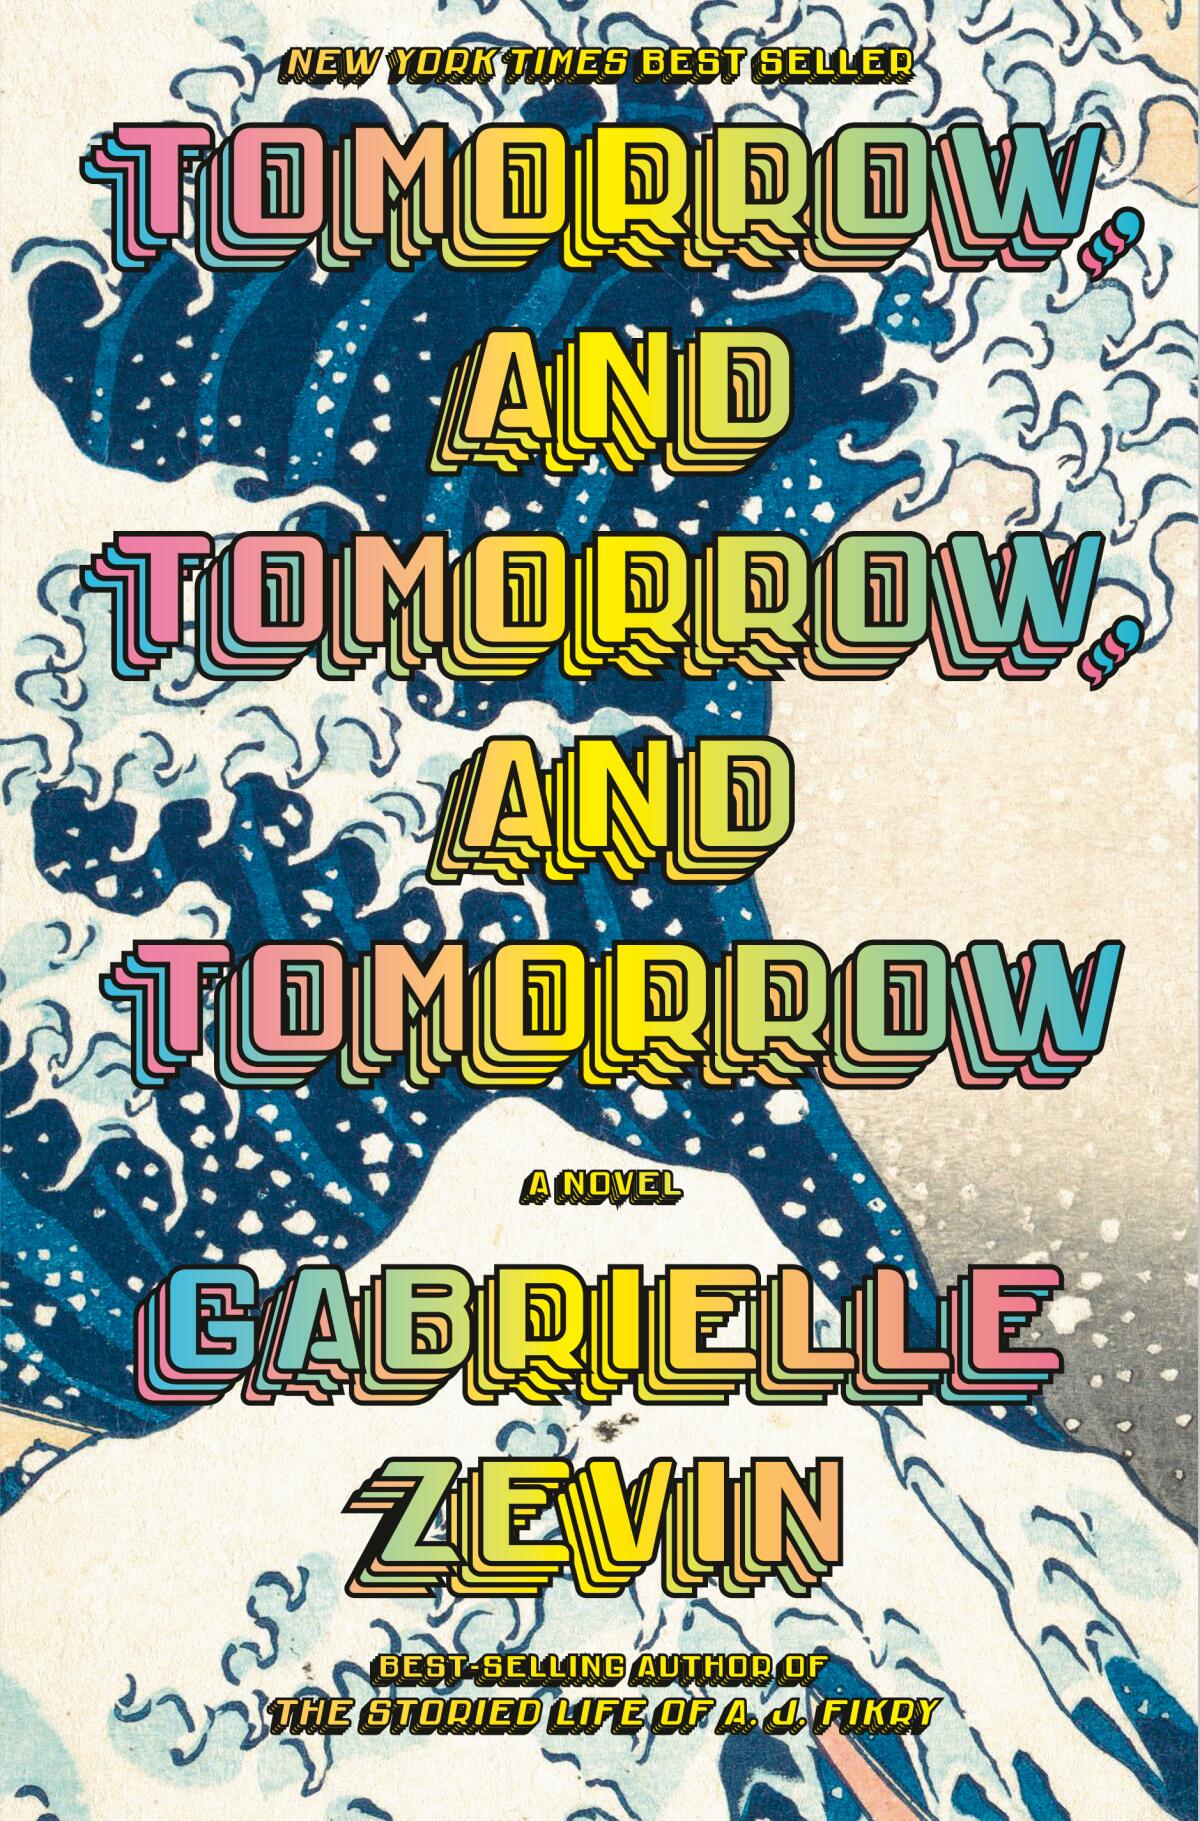 Book cover for "Tomorrow and Tomorrow and Tomorrow" by Los Angeles novelist Gabrielle Zevin.